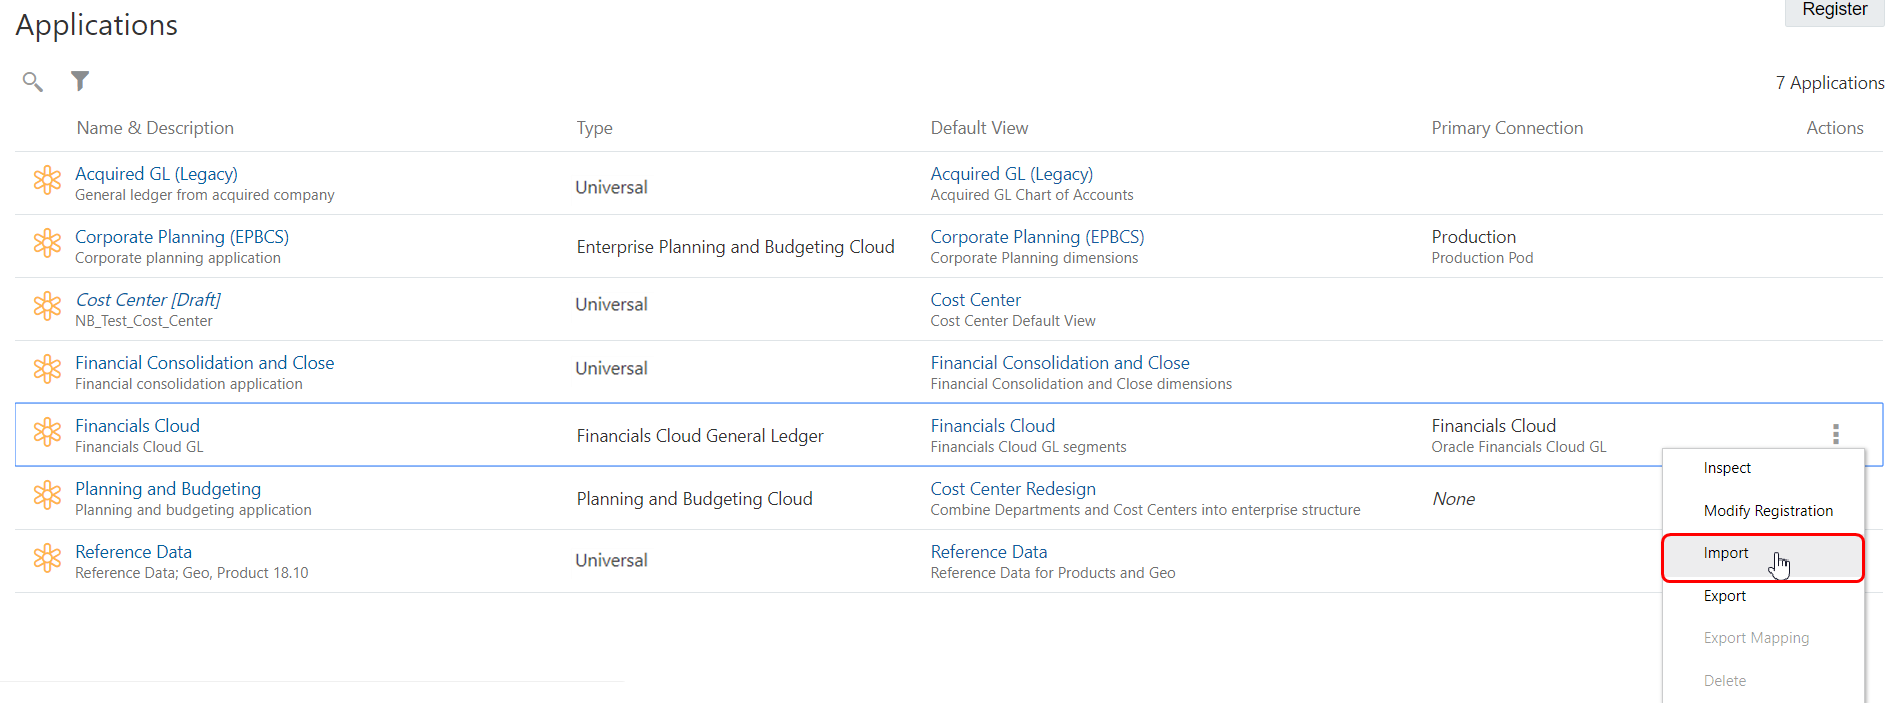 screenshot shows the Financials Cloud application with the Import option highlighted